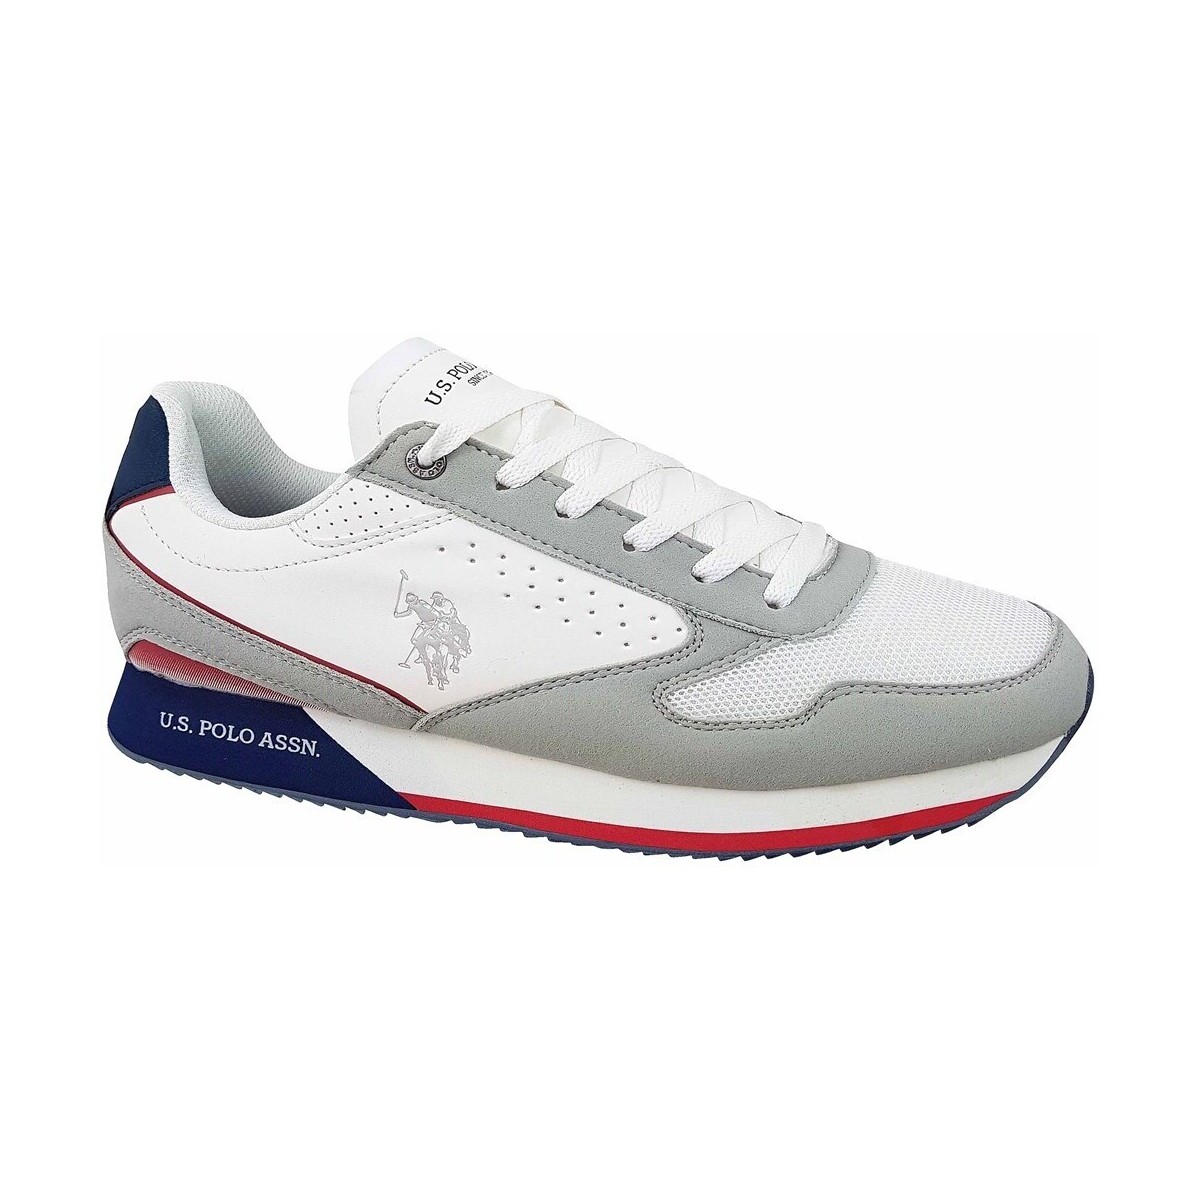 Chaussures Homme Baskets basses U.S Polo Assn. NOBIL003CWHIDBL08 Argent, Blanc